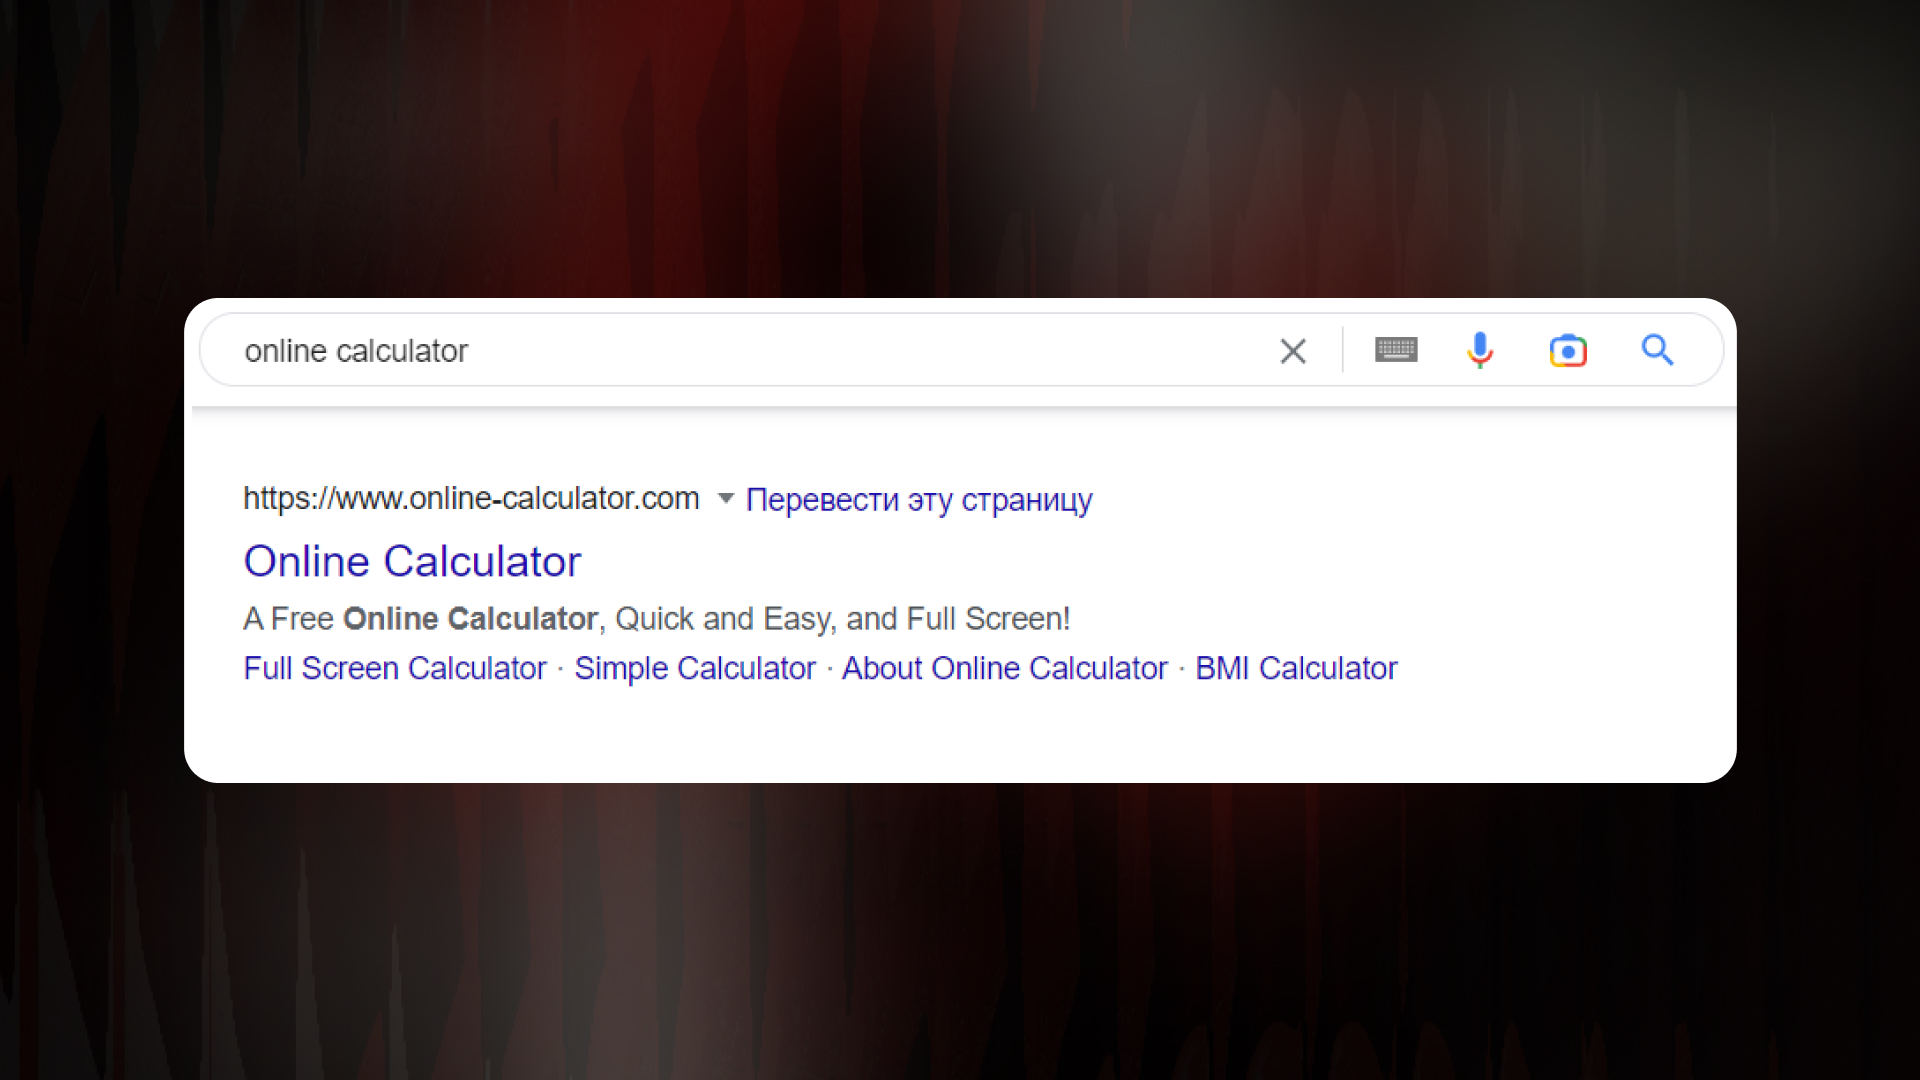 Keyword "online calculator" in the Title